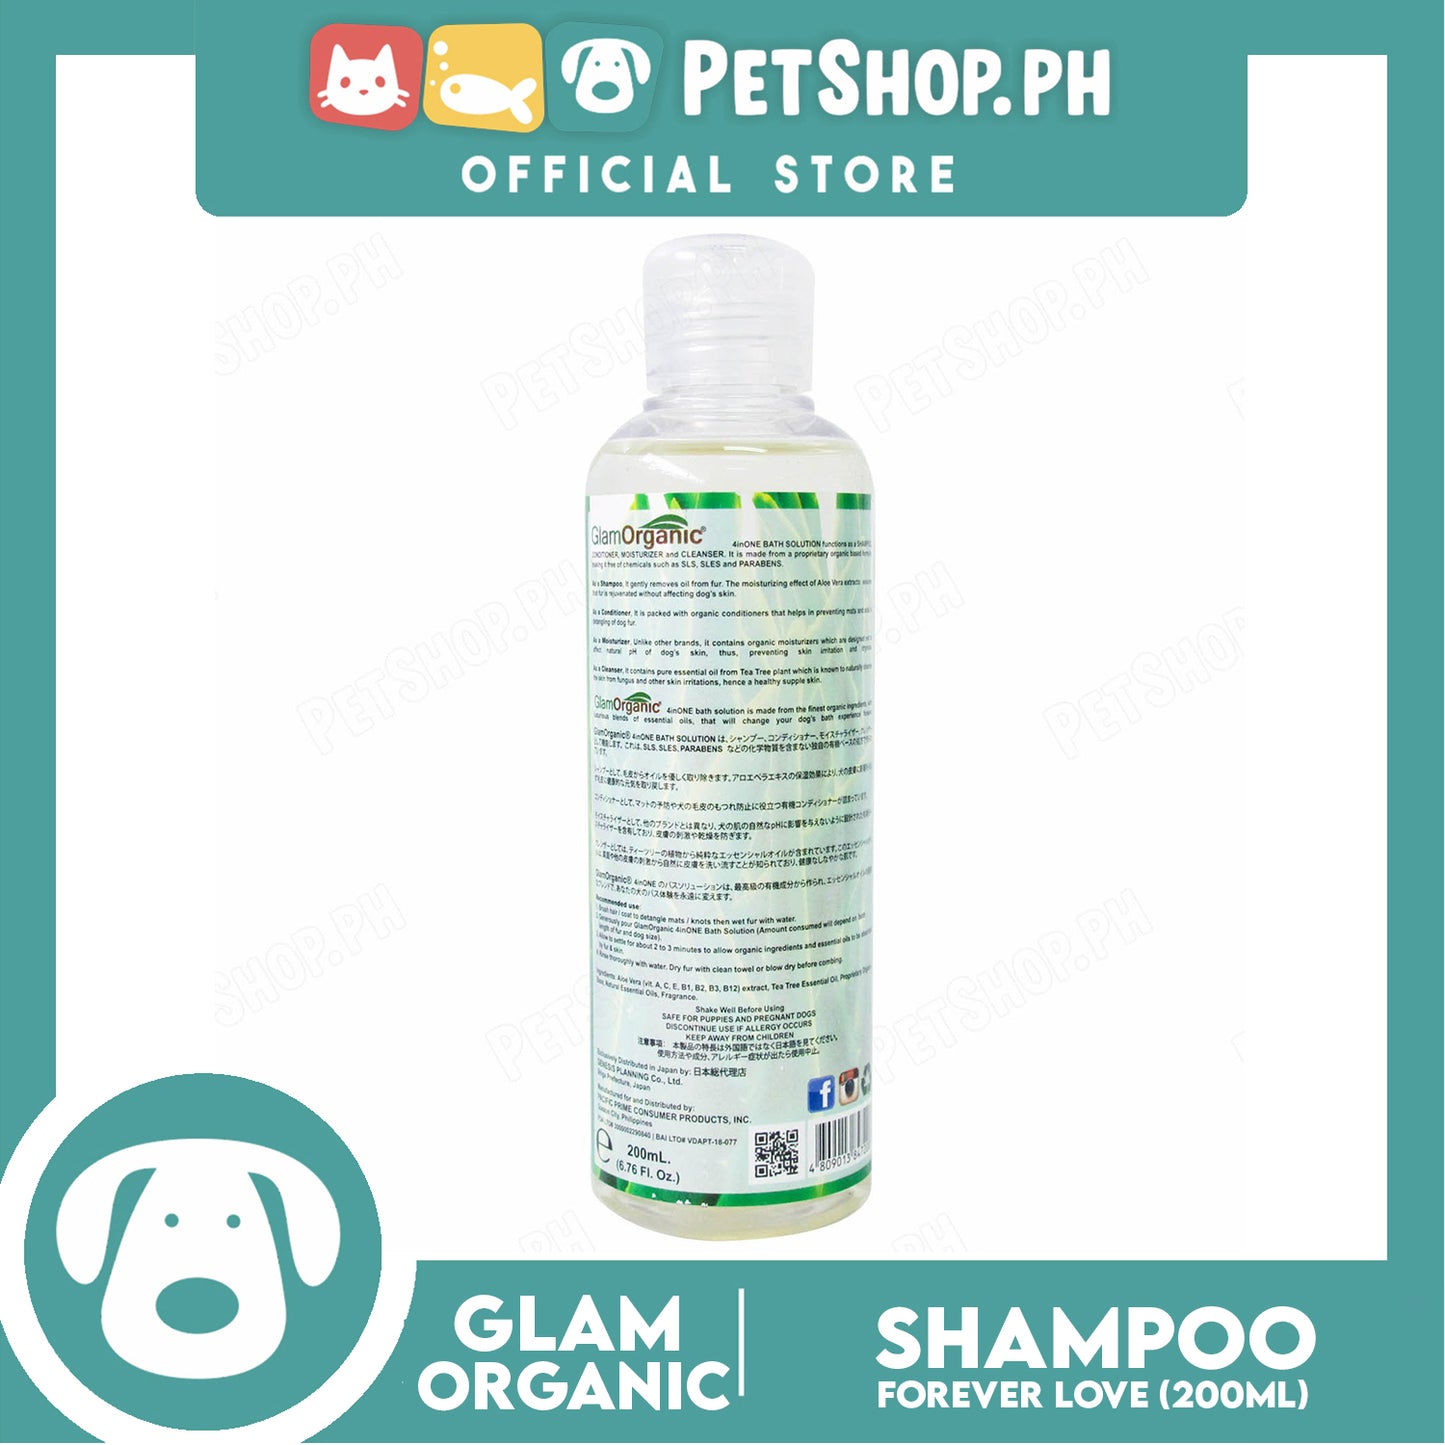 Glam Organic 4 in 1 Bath Solution 100% Organic 200ml (Forever Love) Dog Grooming